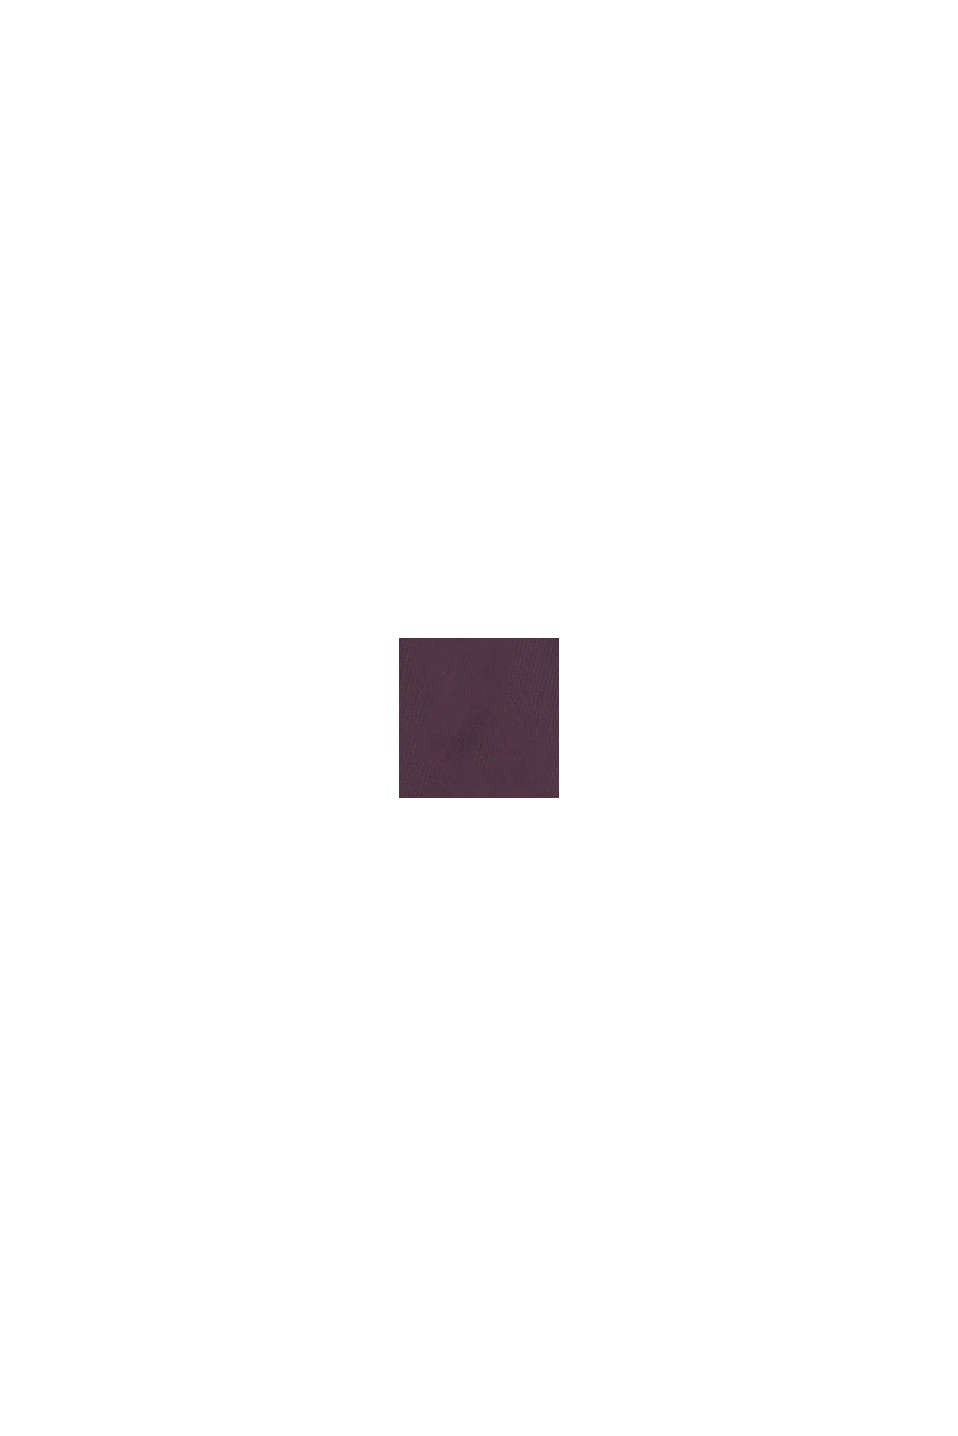 Giacca outdoor, AUBERGINE, swatch